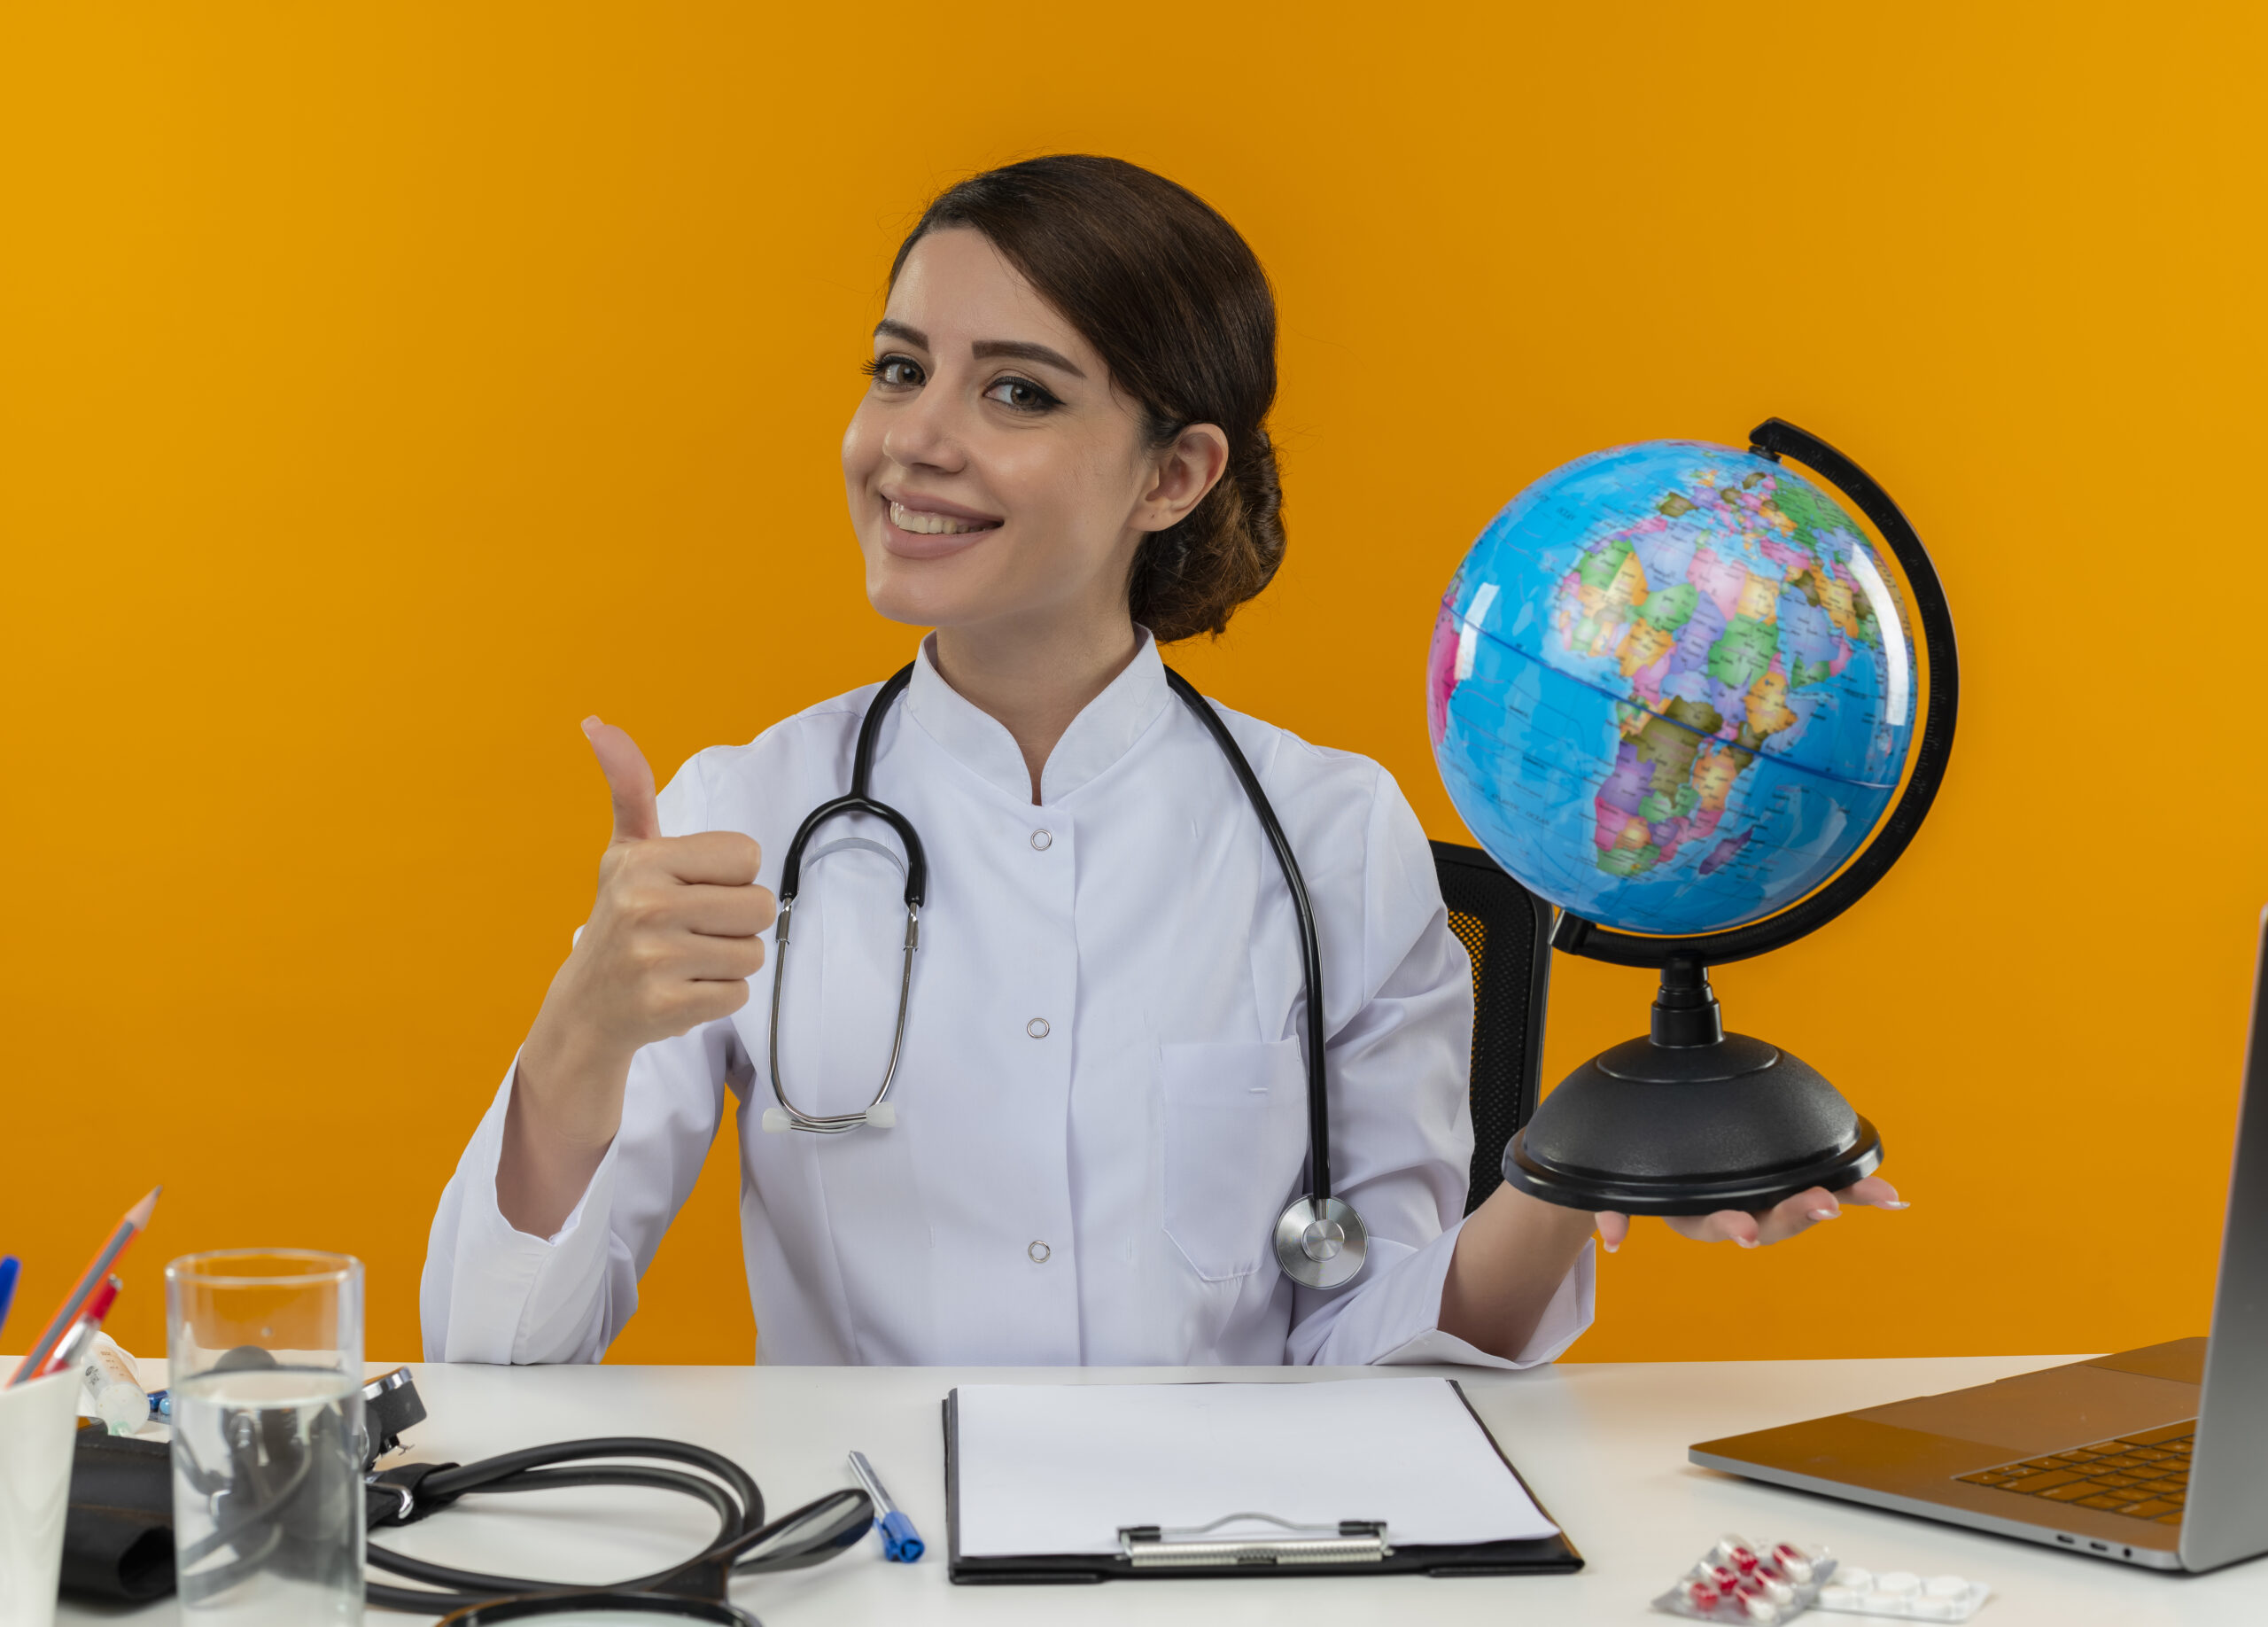 smiling young female doctor wearing medical robe and stethoscope sitting at desk with medical tools and laptop holding globe showing thumb up isolated on yellow background